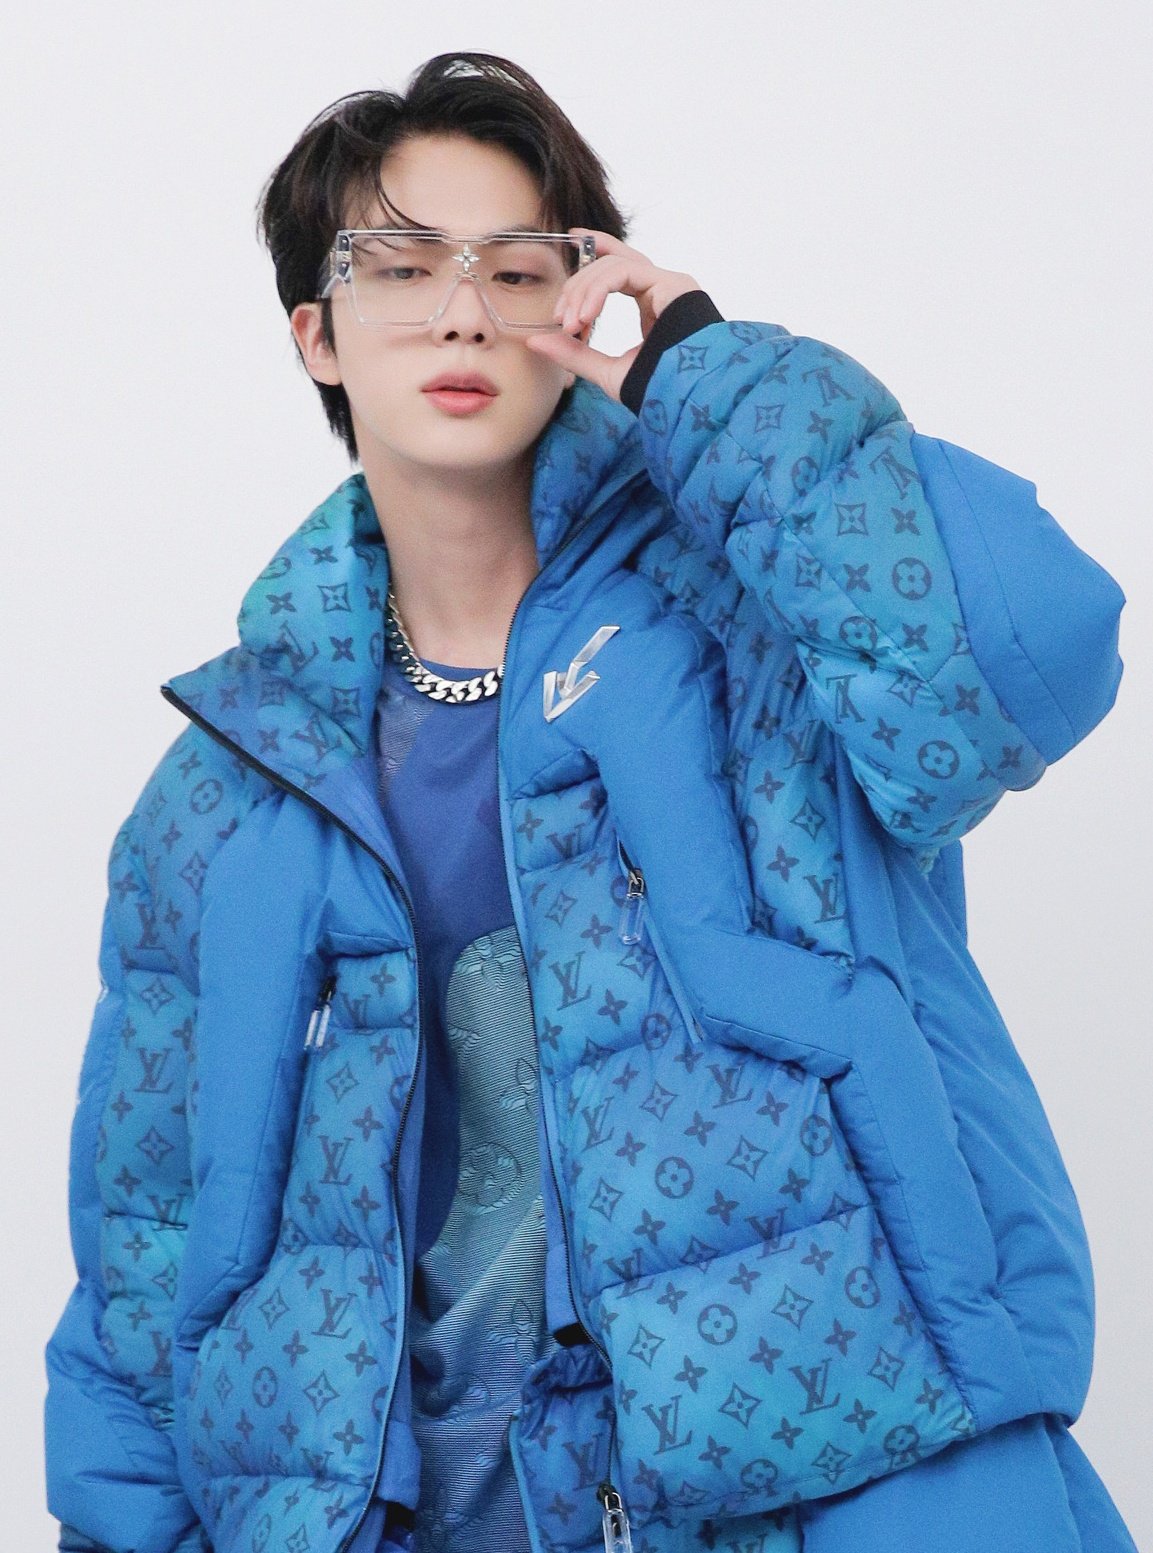 jin louis vuitton with glasses